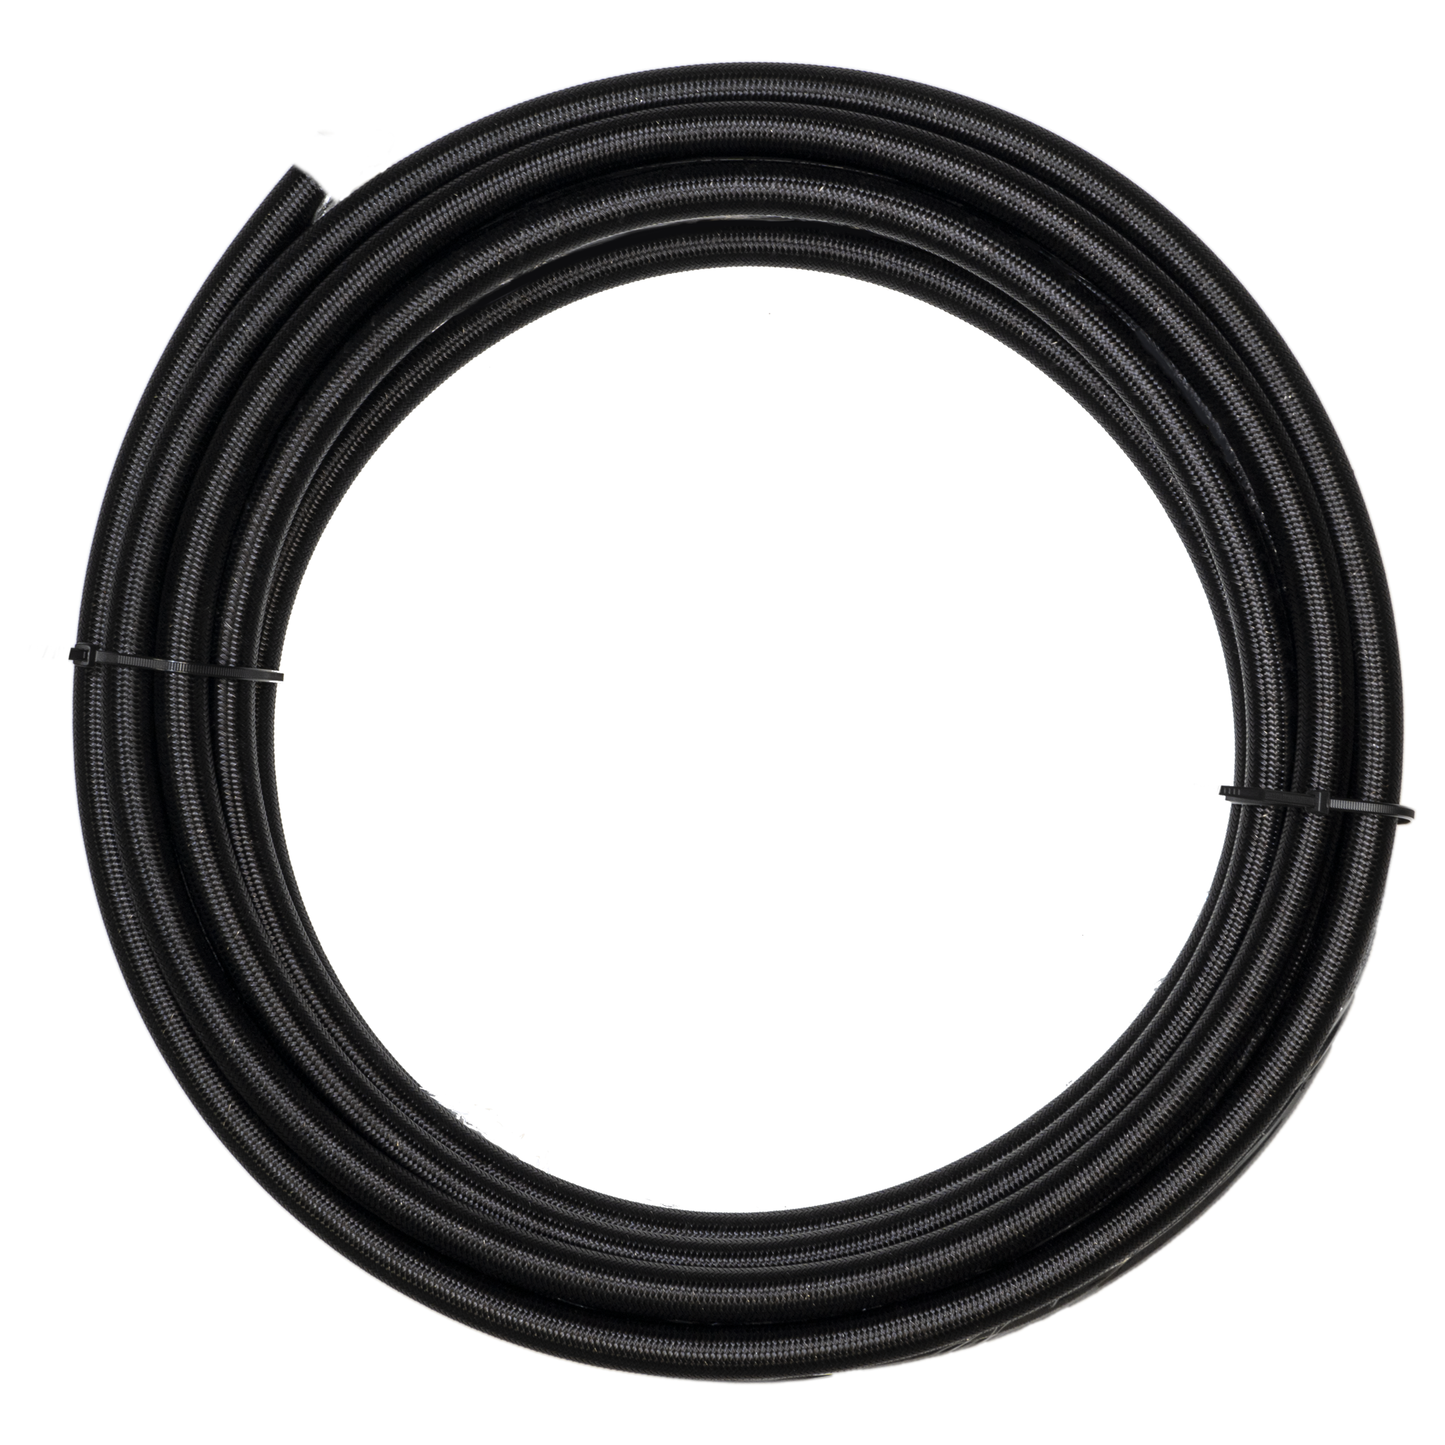 Black Stainless Steel Braided Hose - PTFE Liner - Per Foot